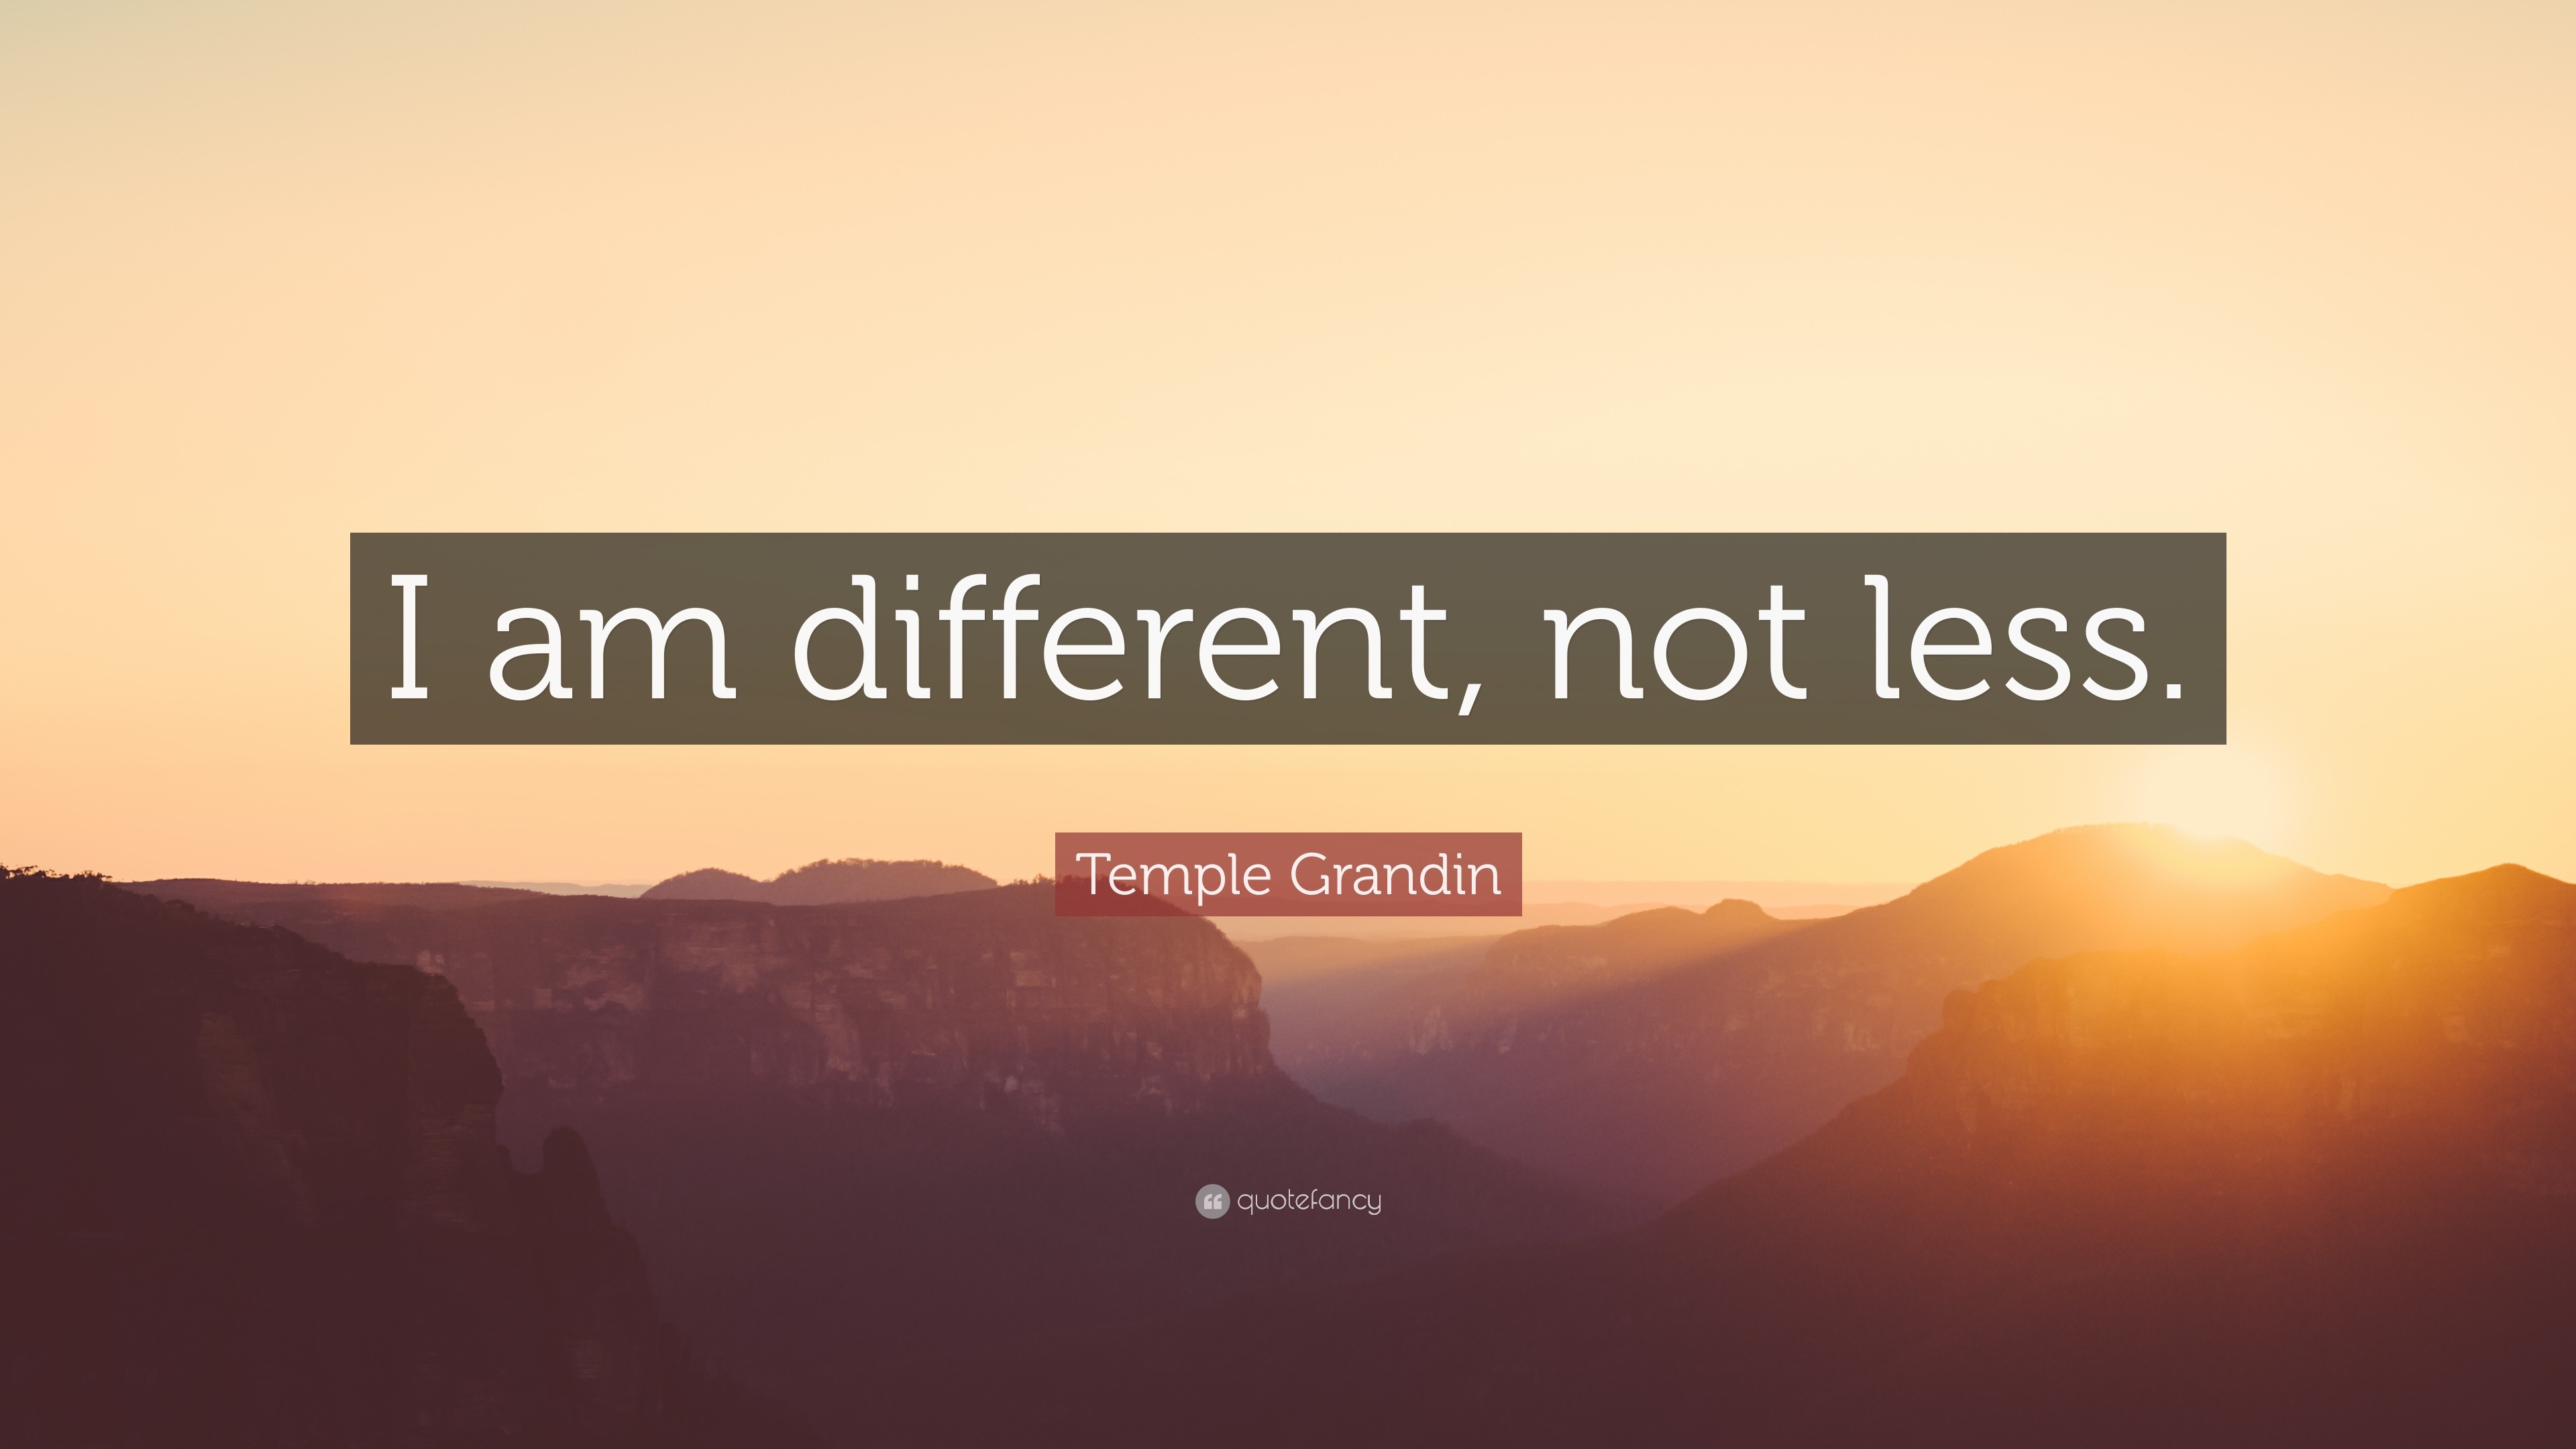 Temple Grandin Quote: “I am different, not less.”